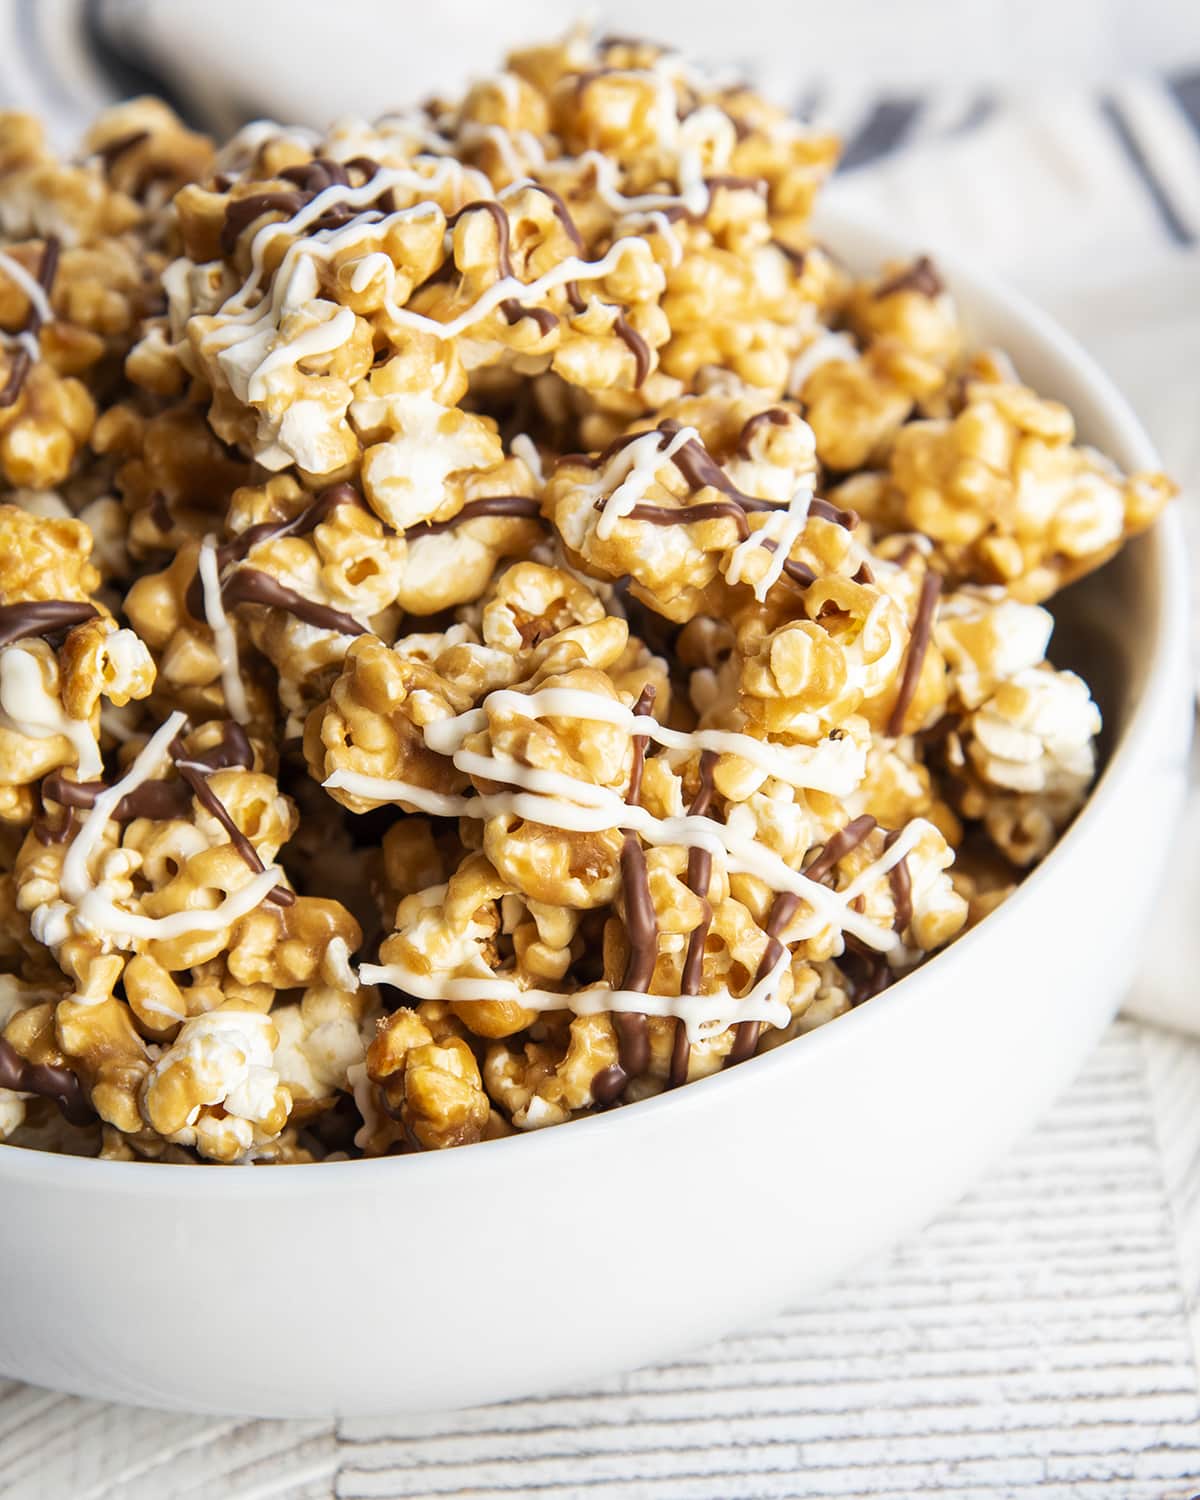 A bowl of zebra popcorn with a golden caramel color, and drizzled with chocolate, and white chocolate.